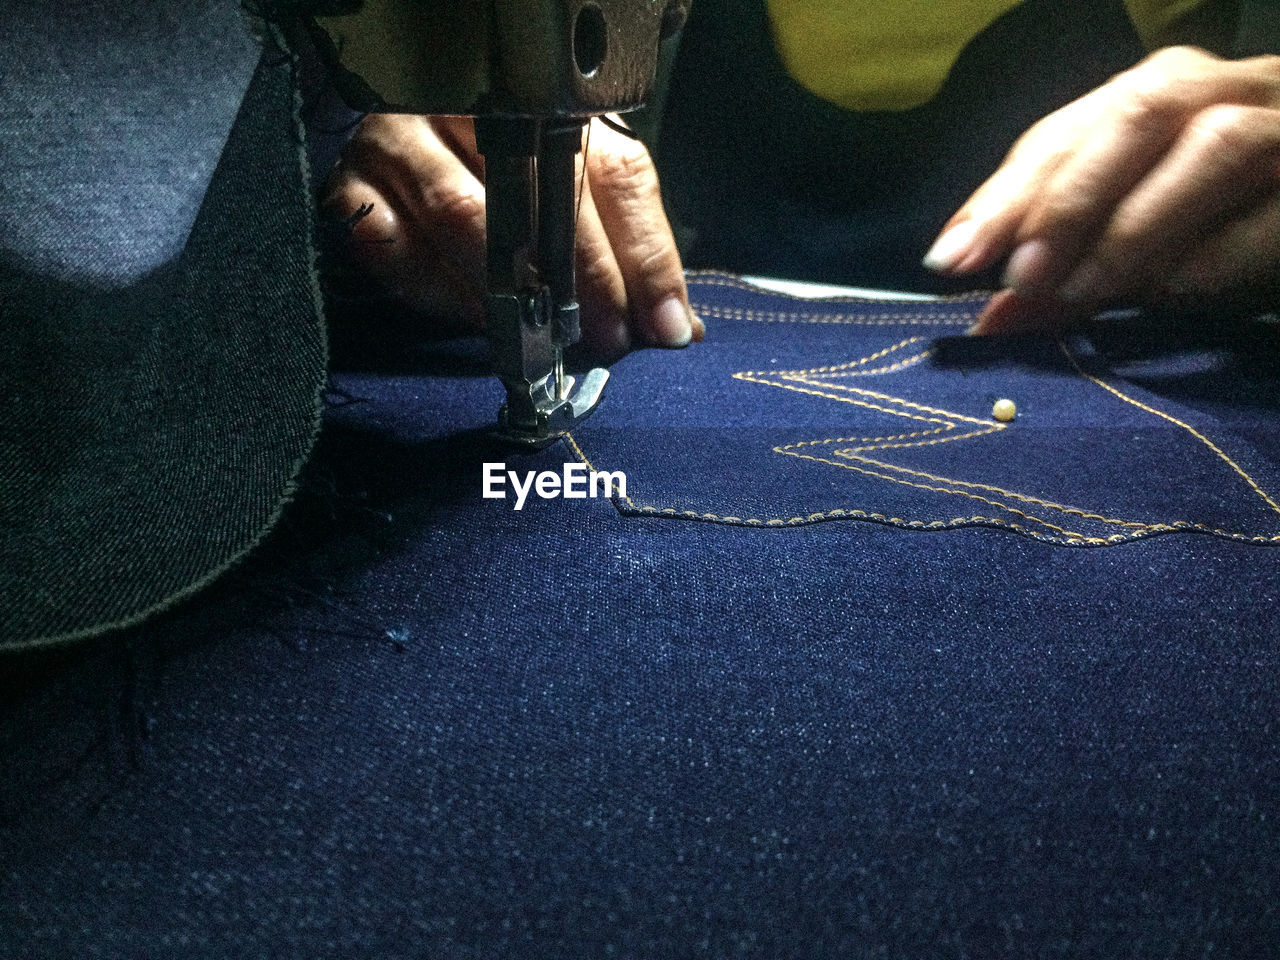 Cropped hands sewing jeans on machine